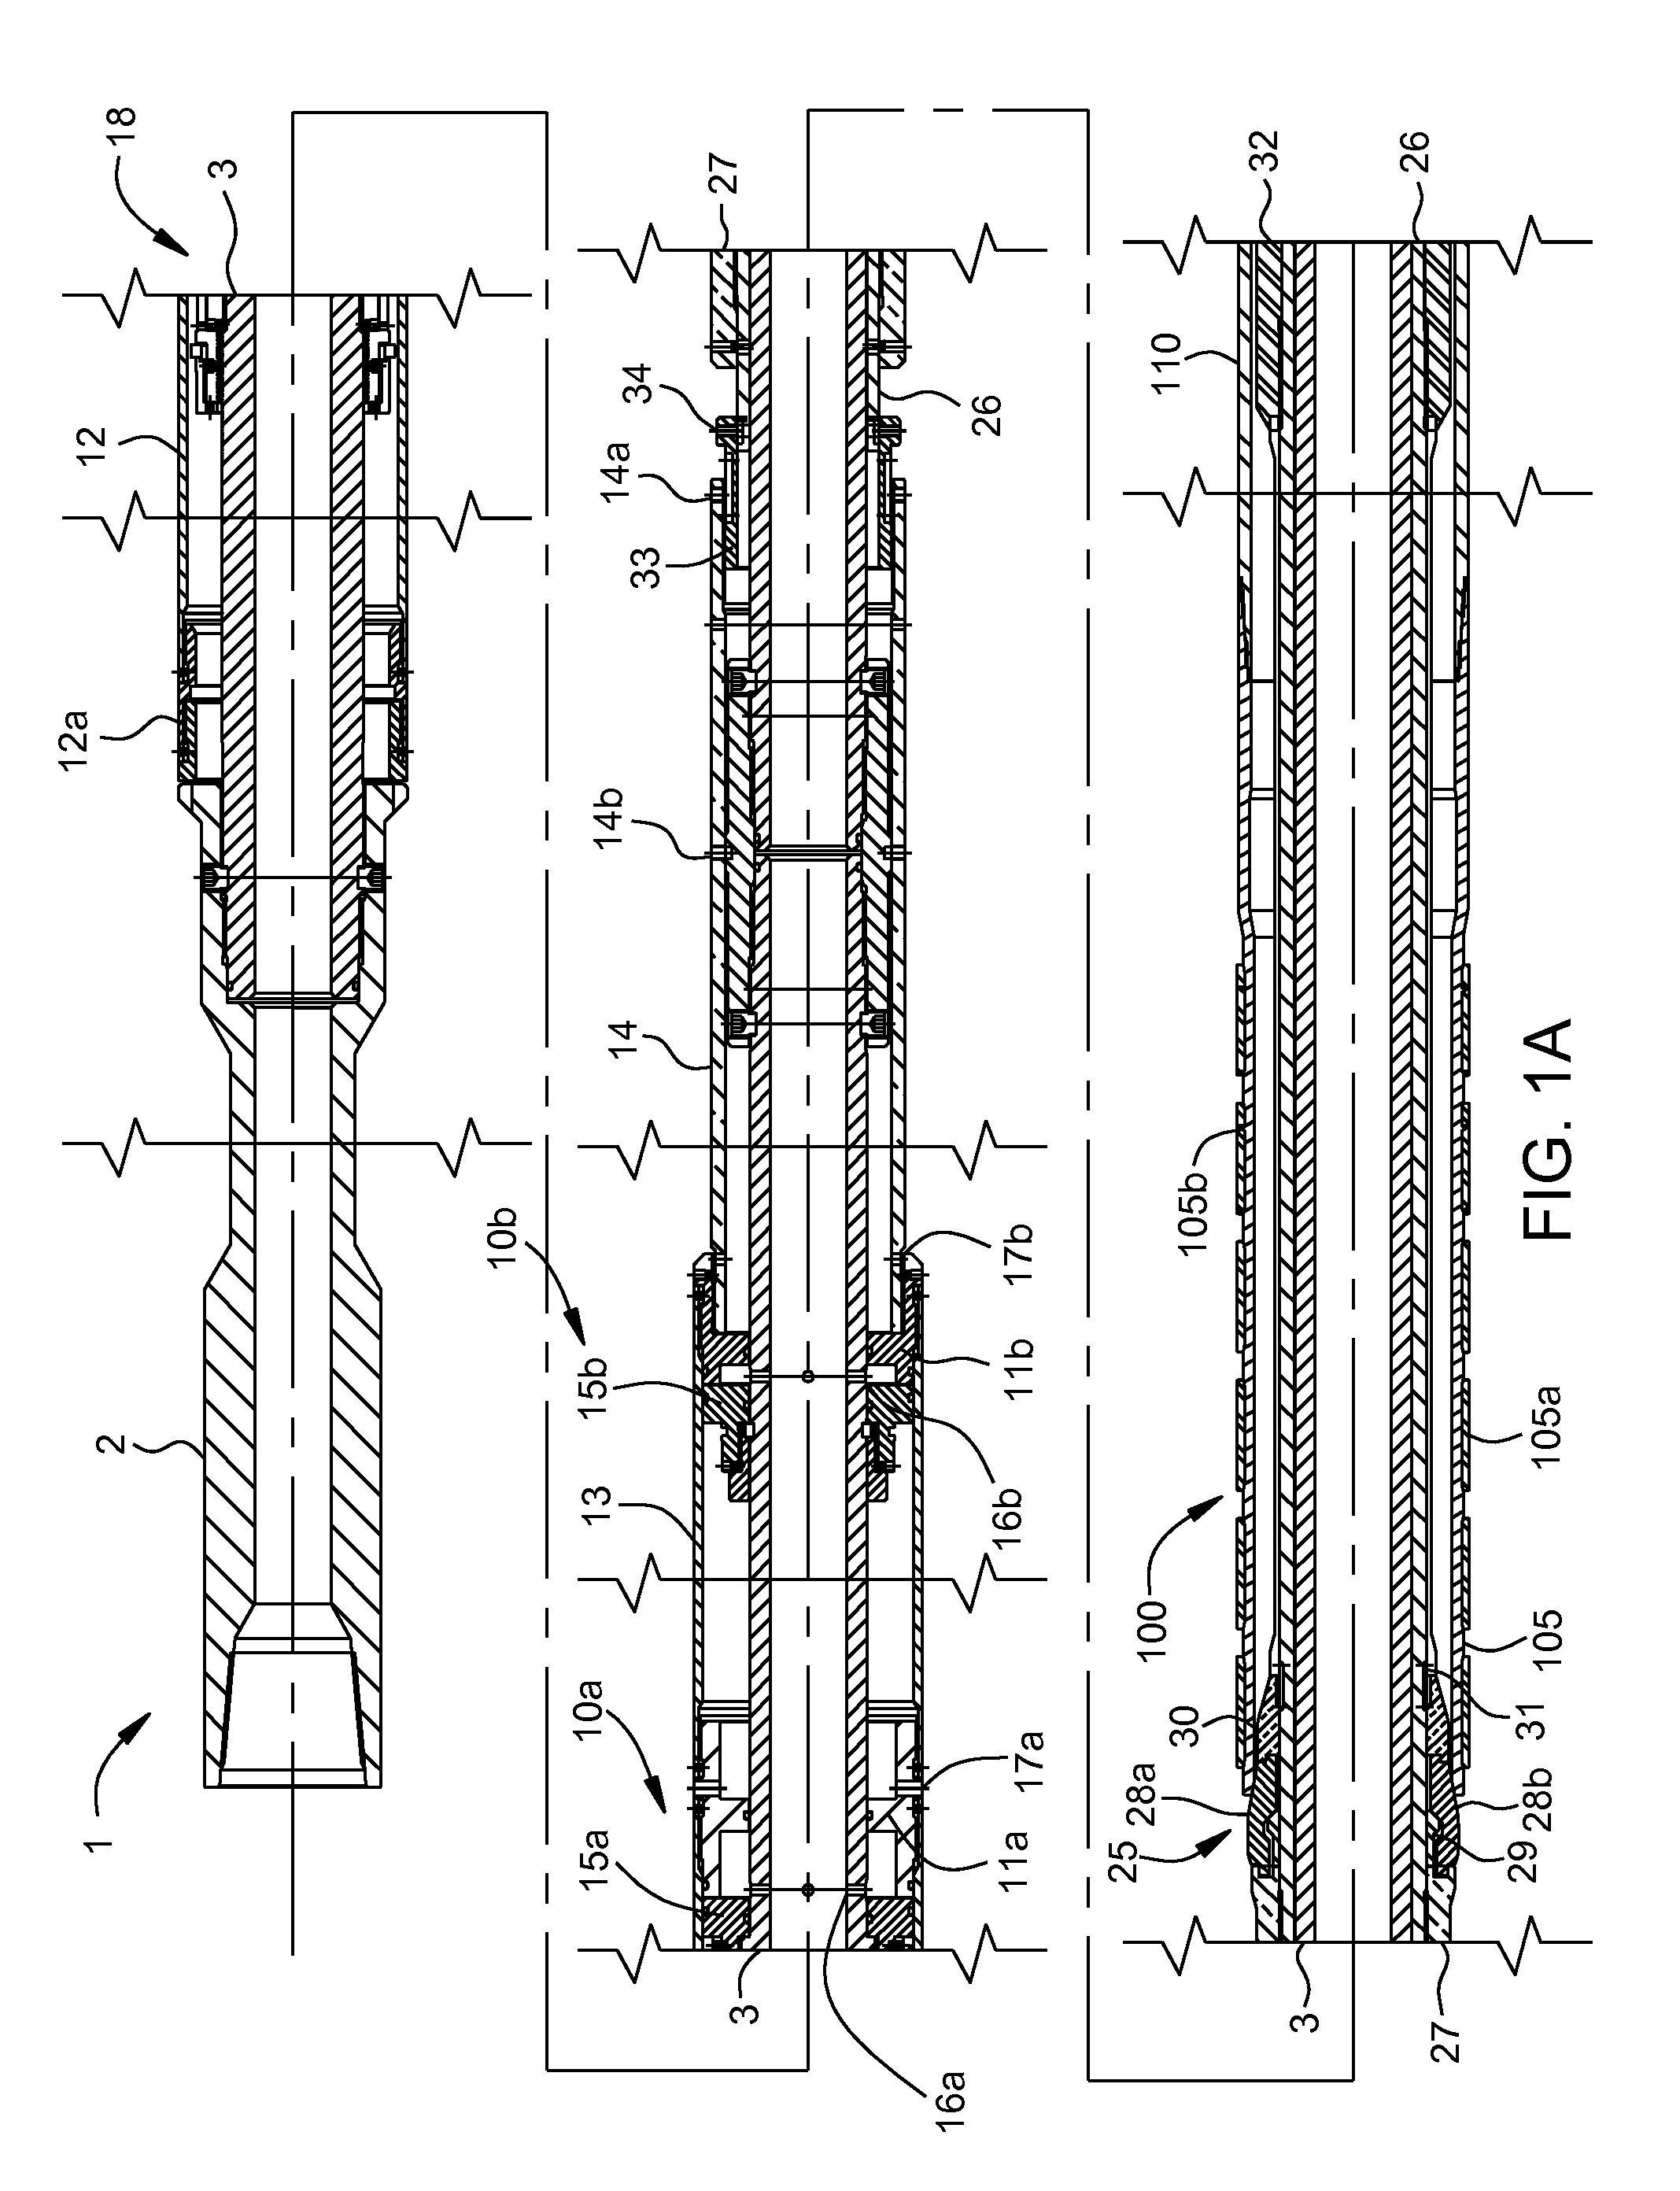 Tools and methods for hanging and/or expanding liner strings